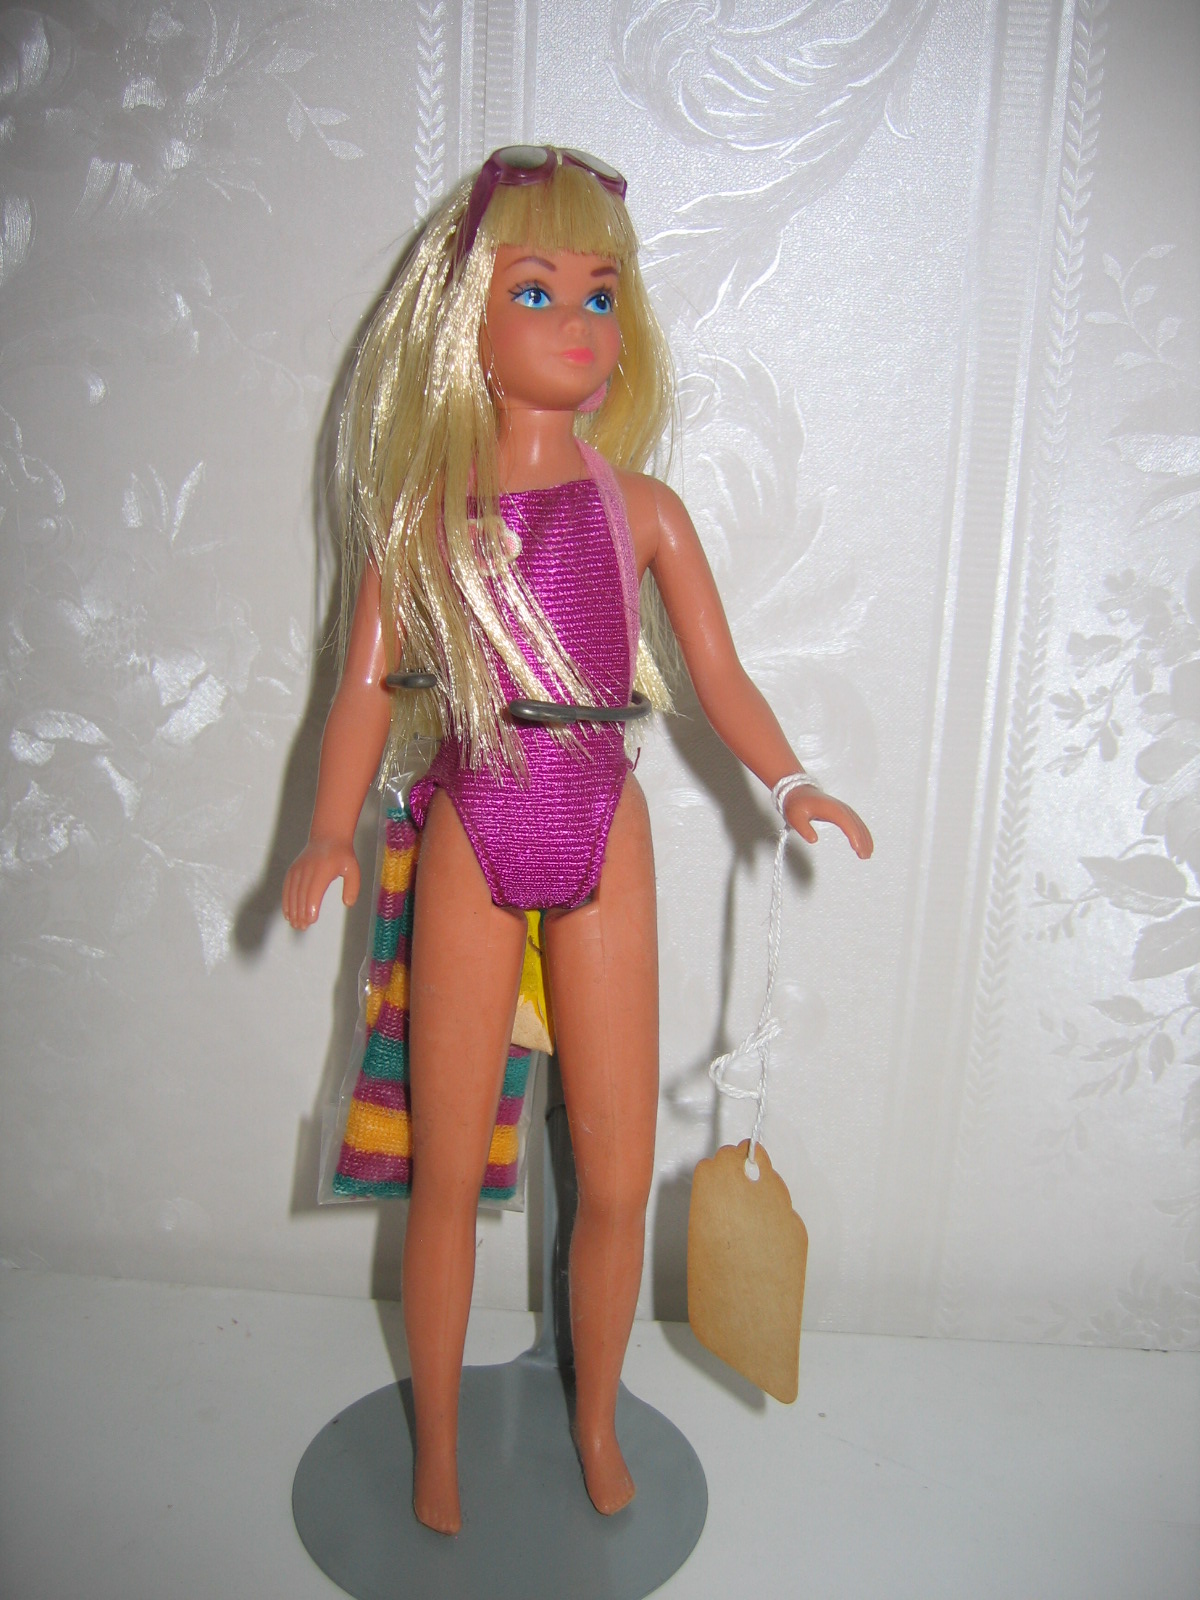 Collectible 1980's - 1990's Beach Swimming Barbie Doll Item #324 For Sale